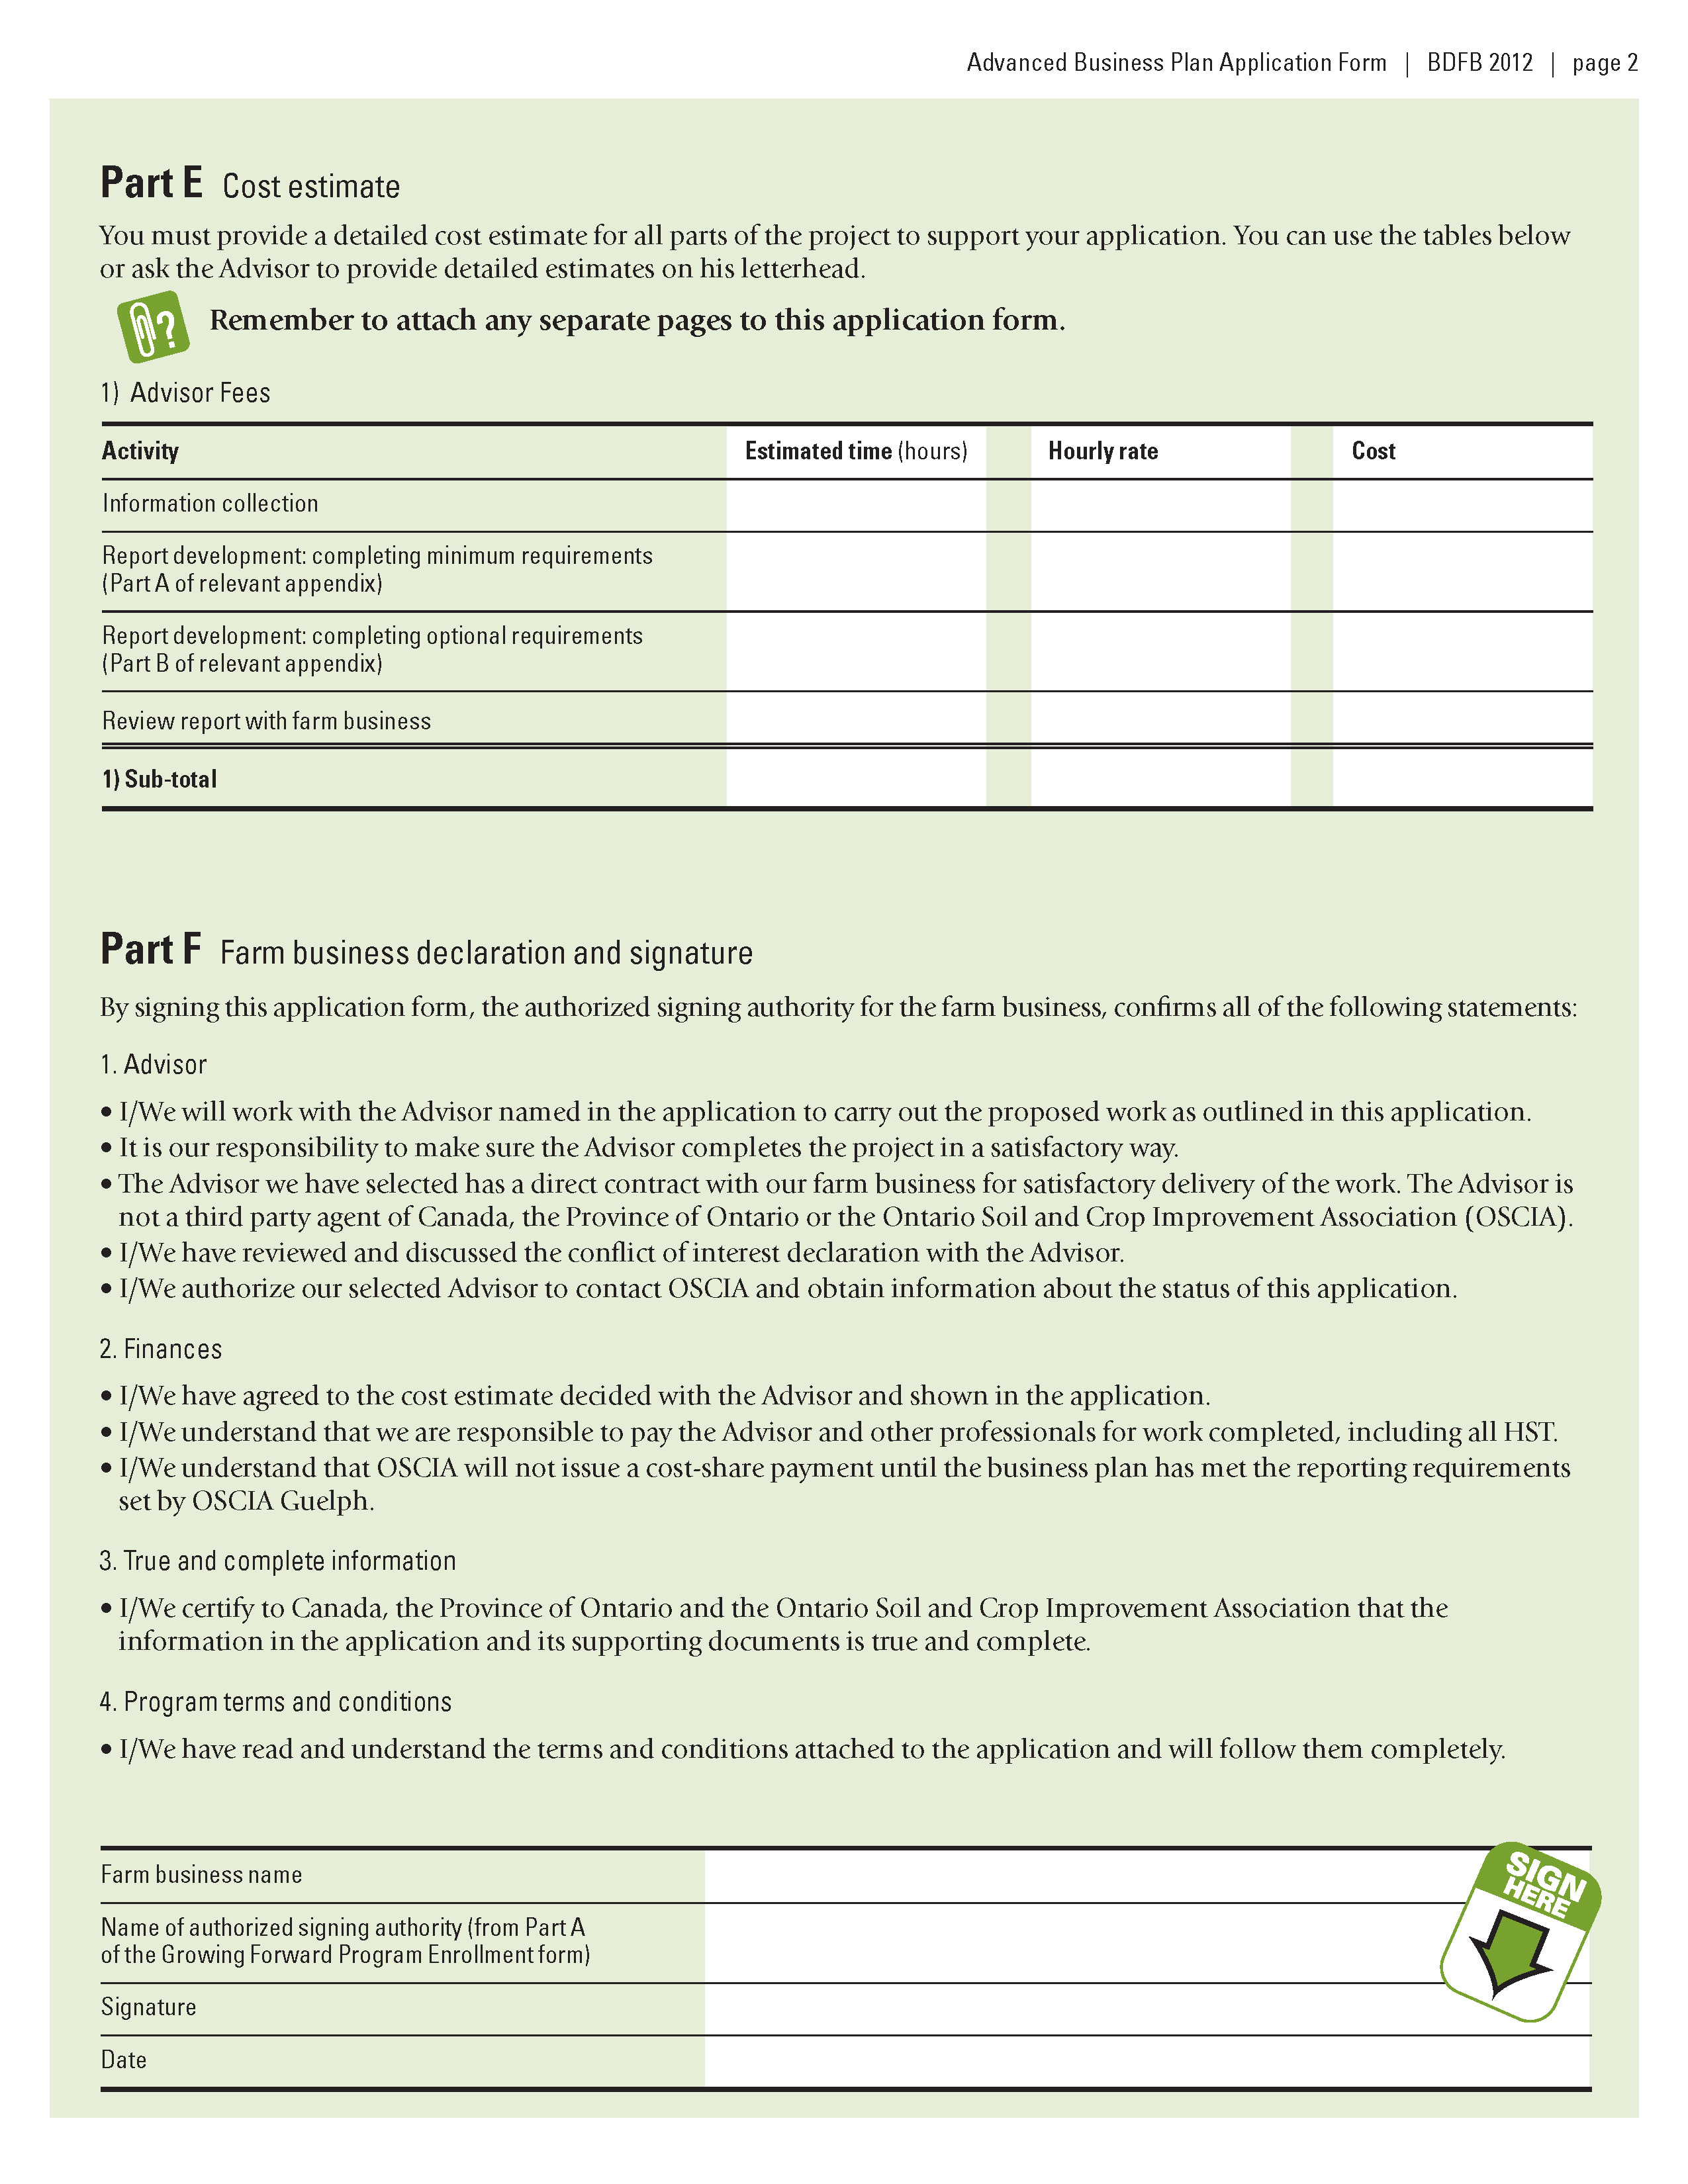 Image of a page from Advance Business Plan form: Application form Part E and Part F